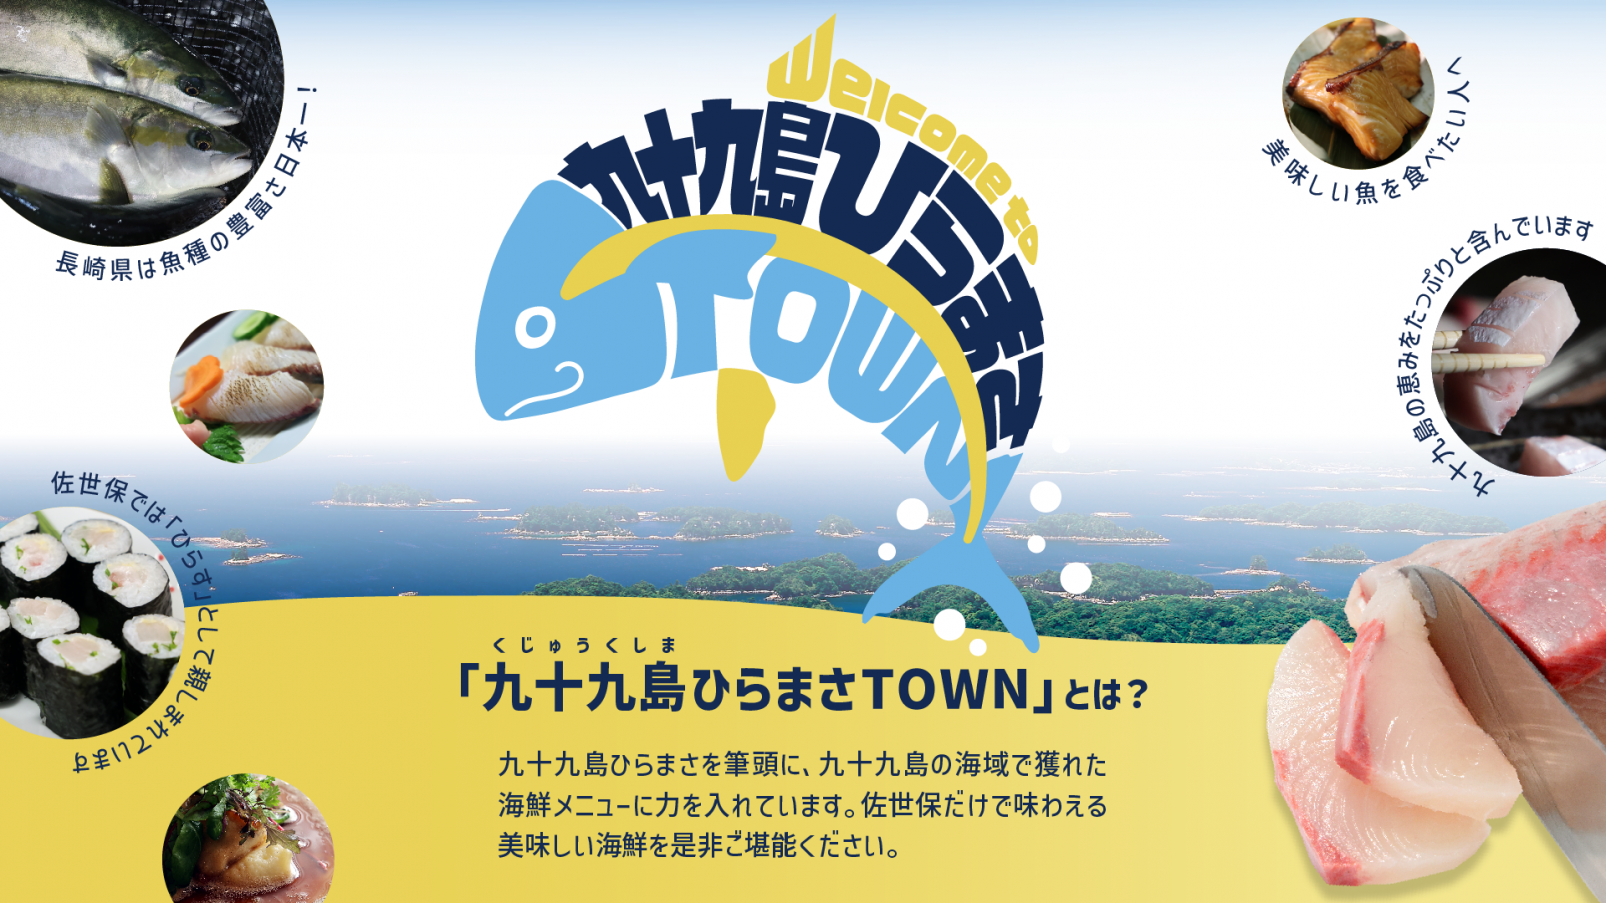 Welcome to 九十九島ひらまさTOWN！